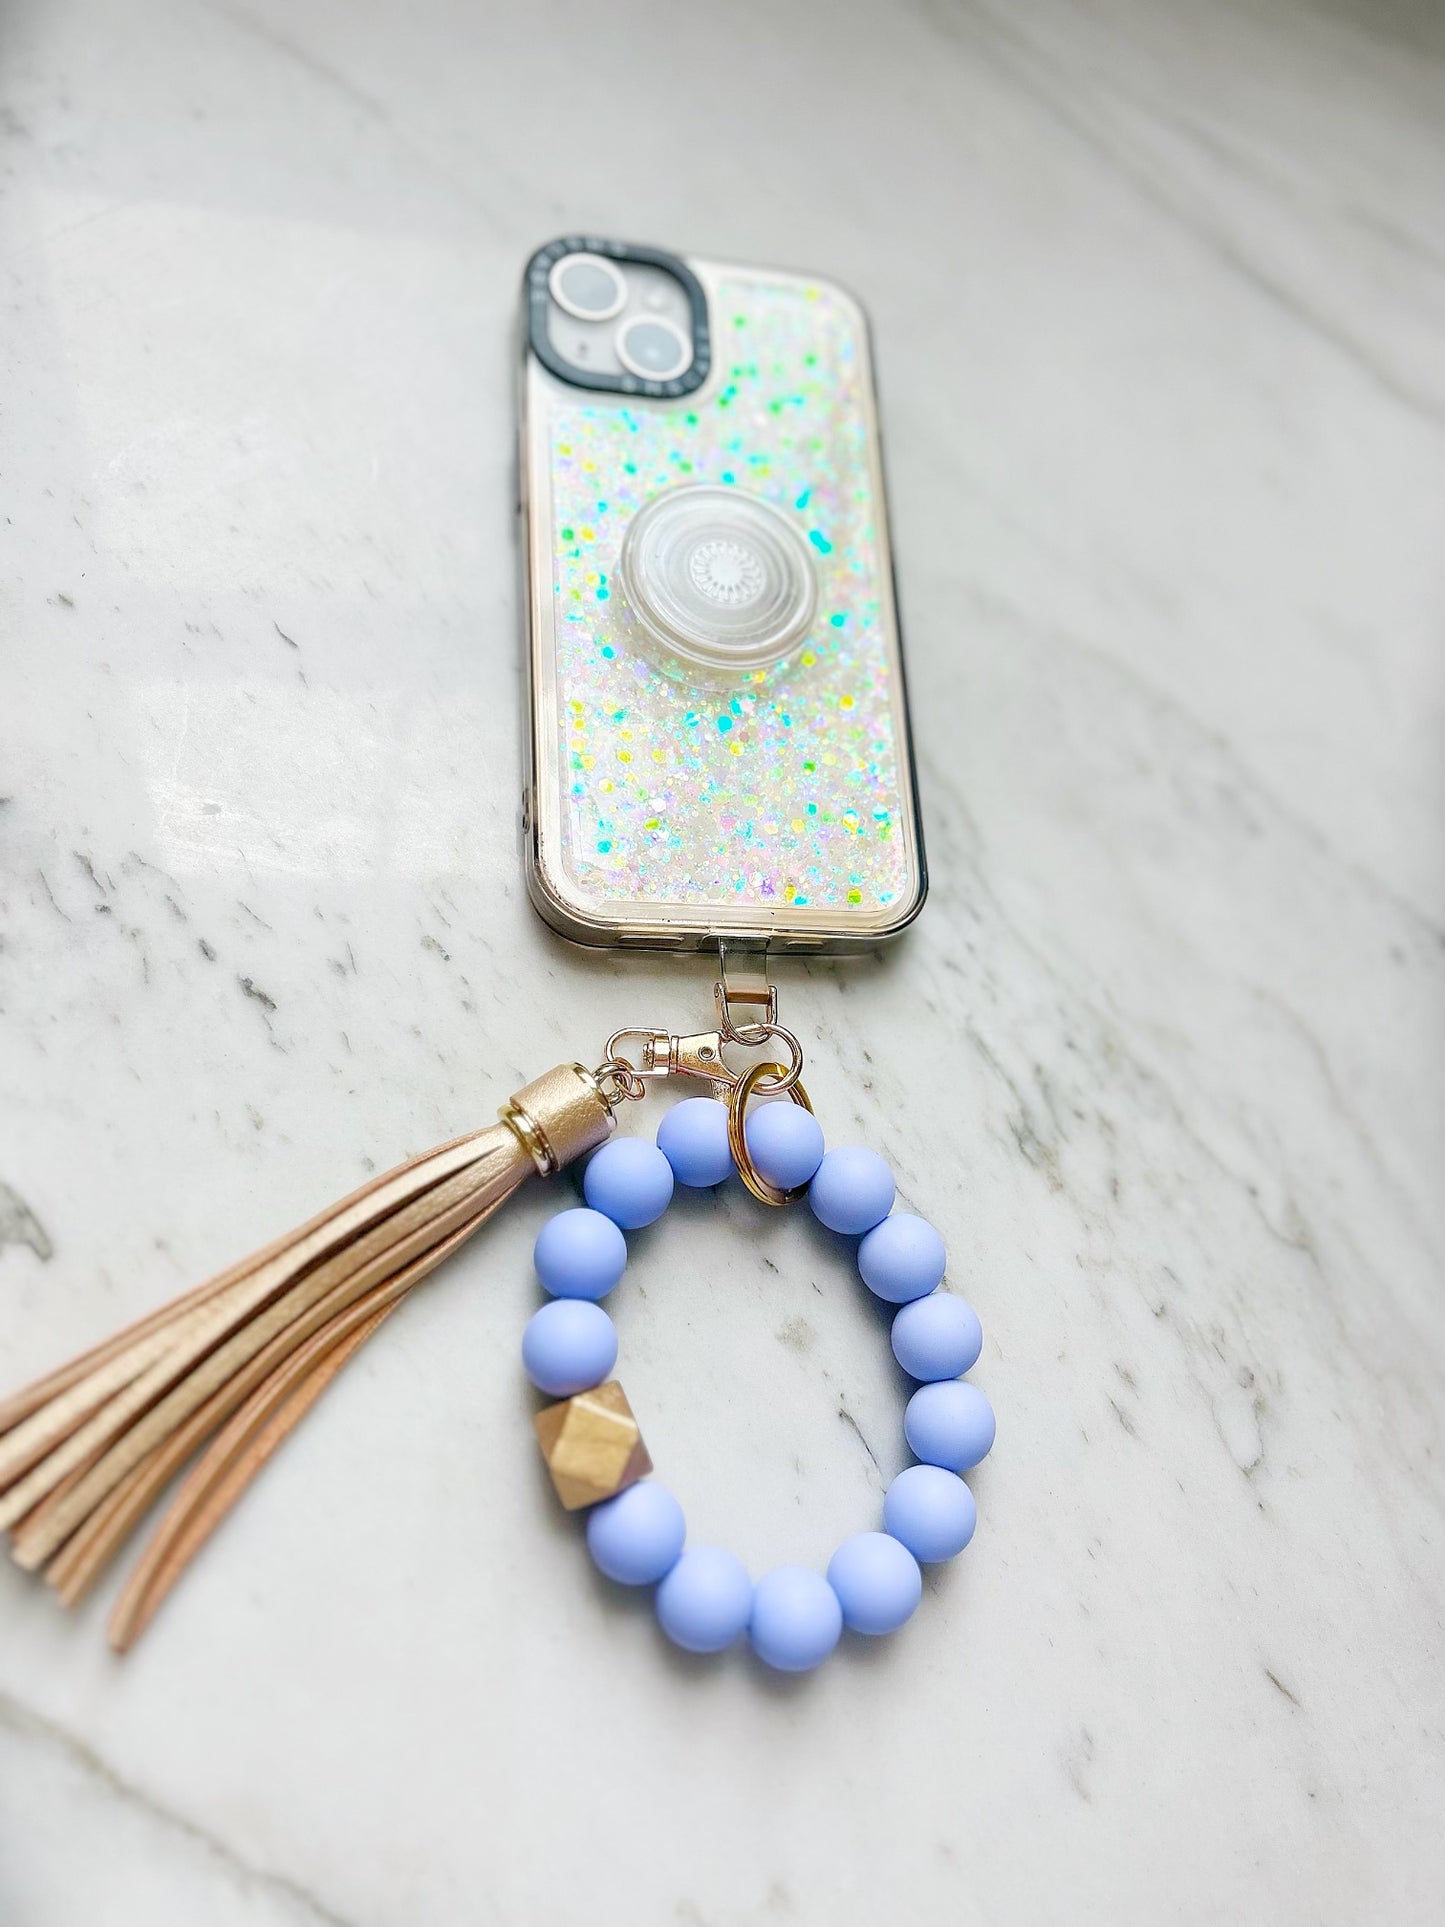 Phone Wristband Keychain: Periwinkle Solid